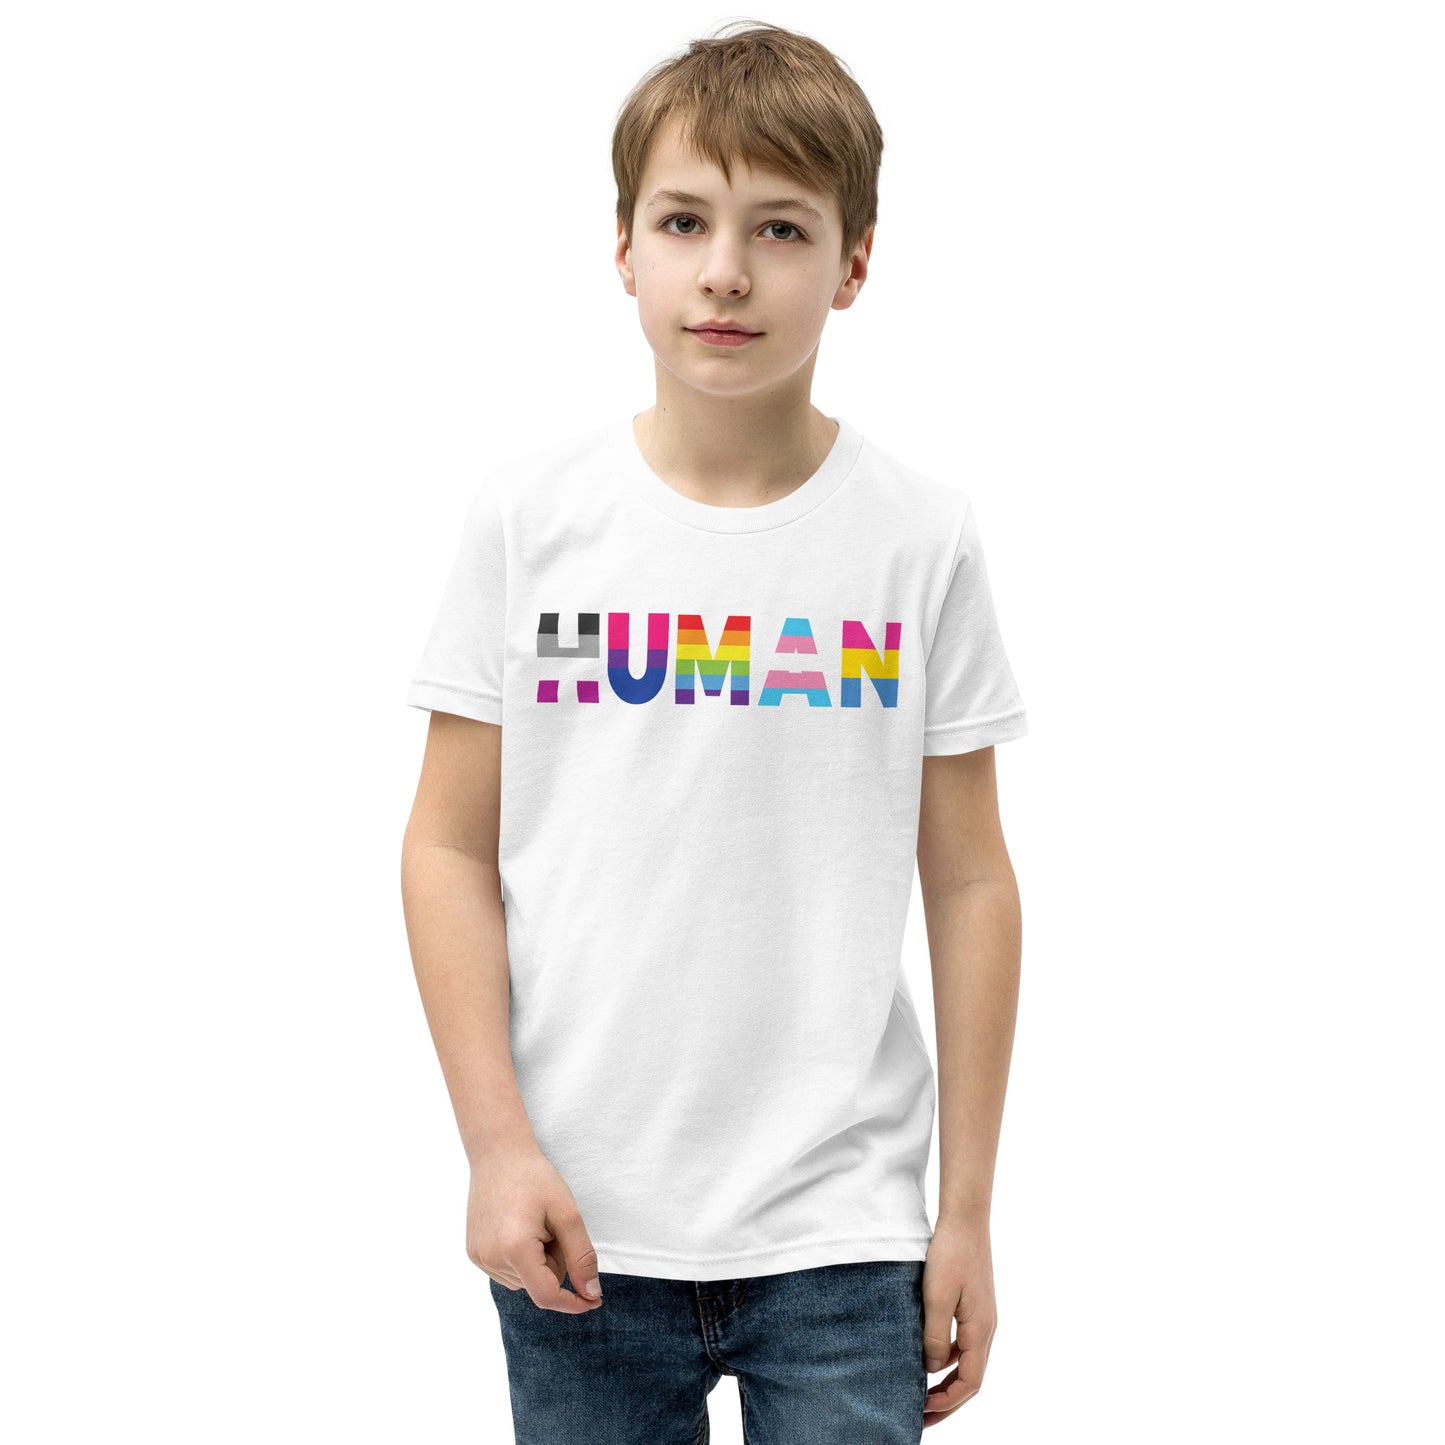 We are ALL Human Tee Youth